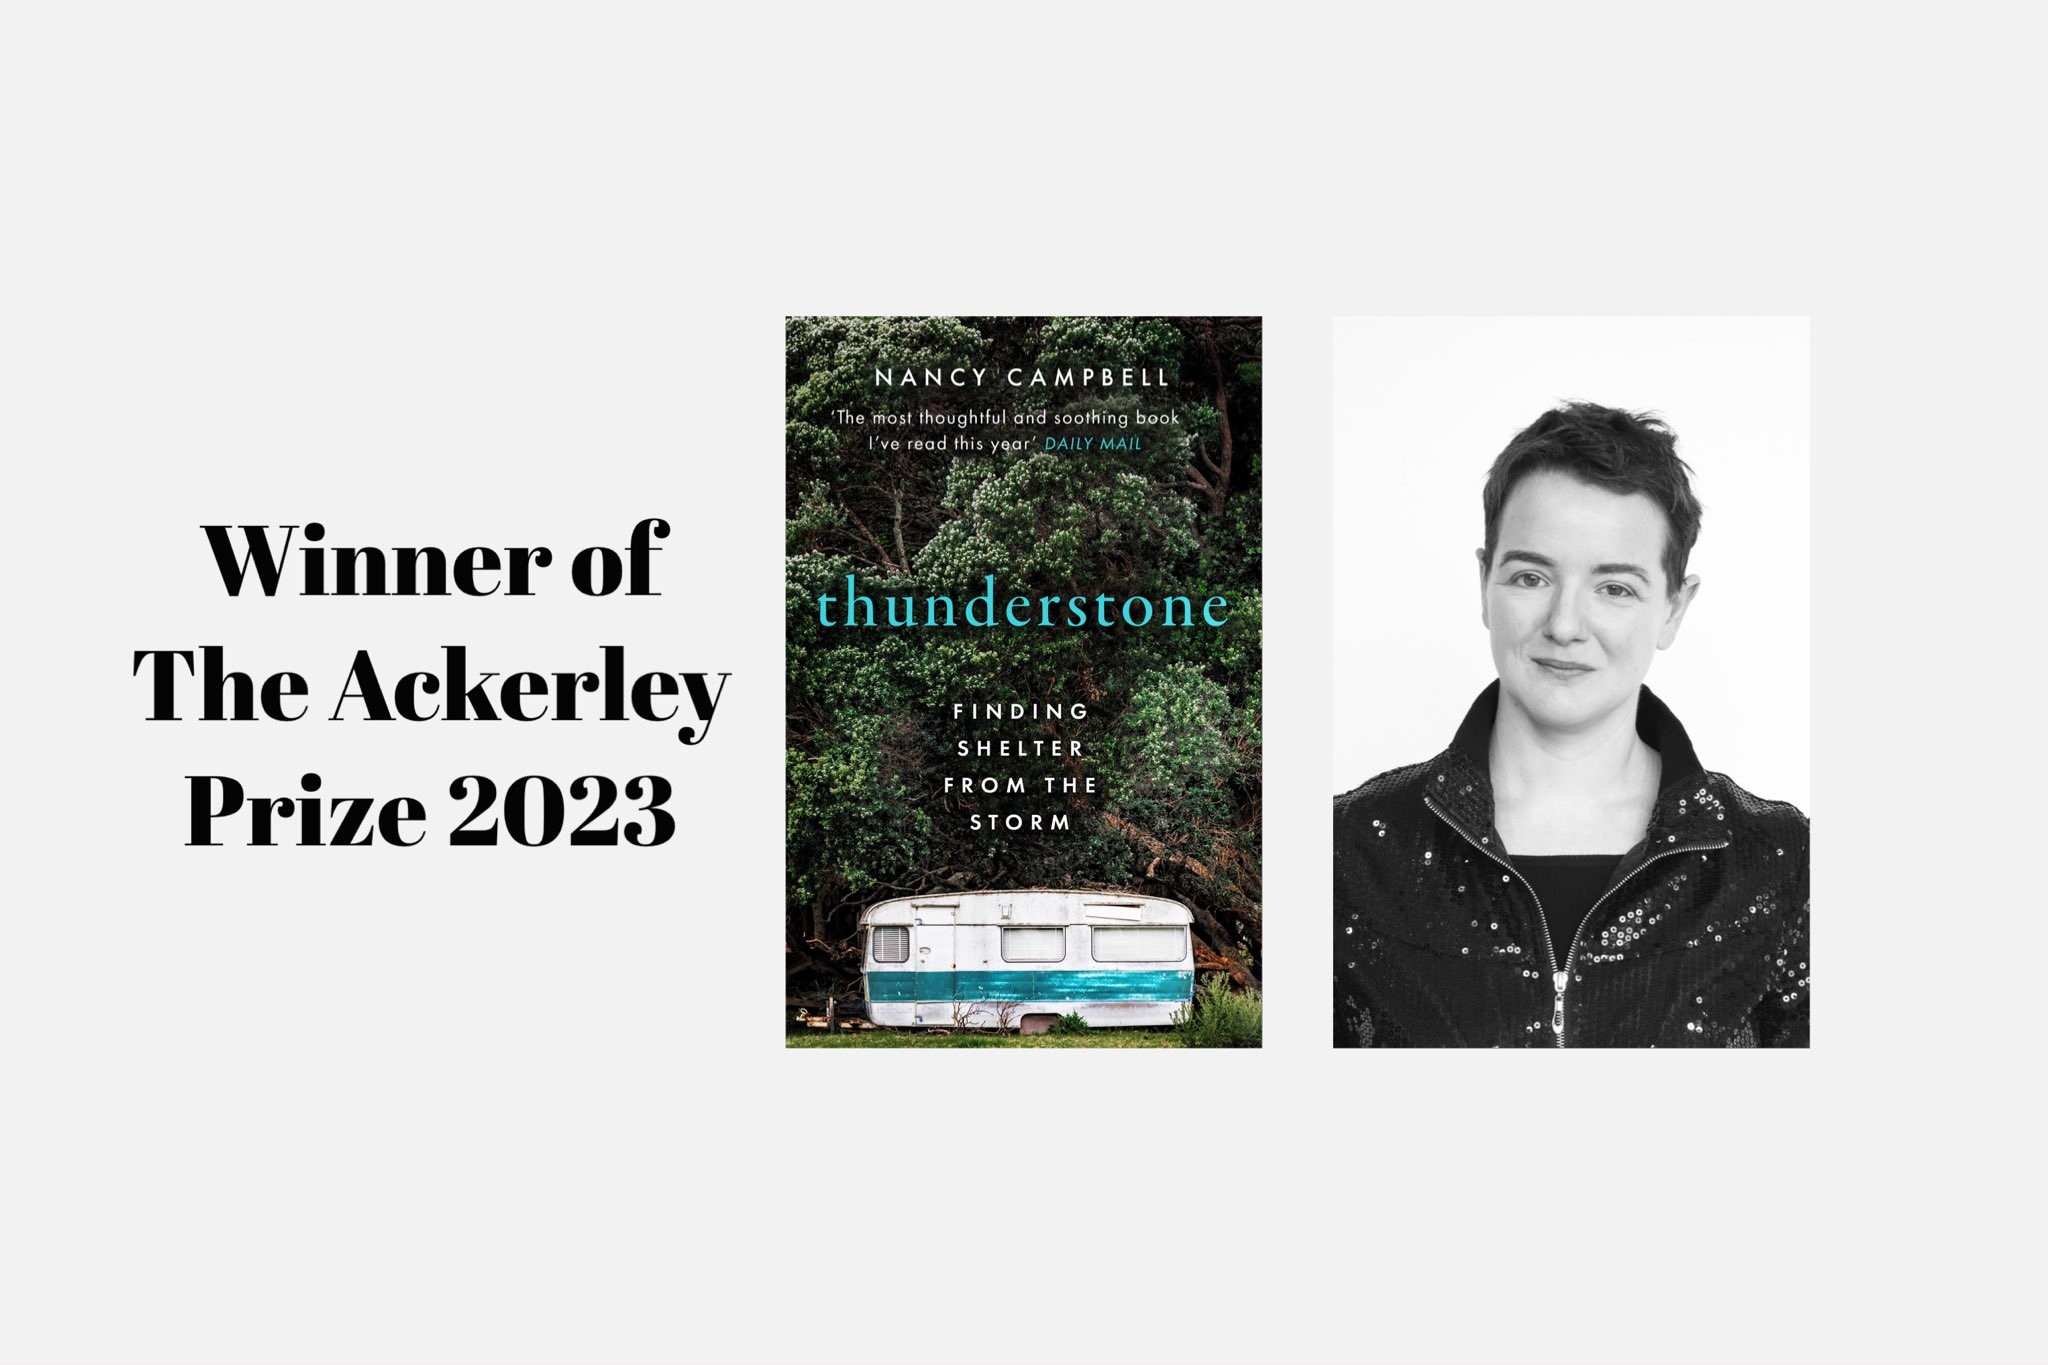 THE ACKERLEY PRIZE